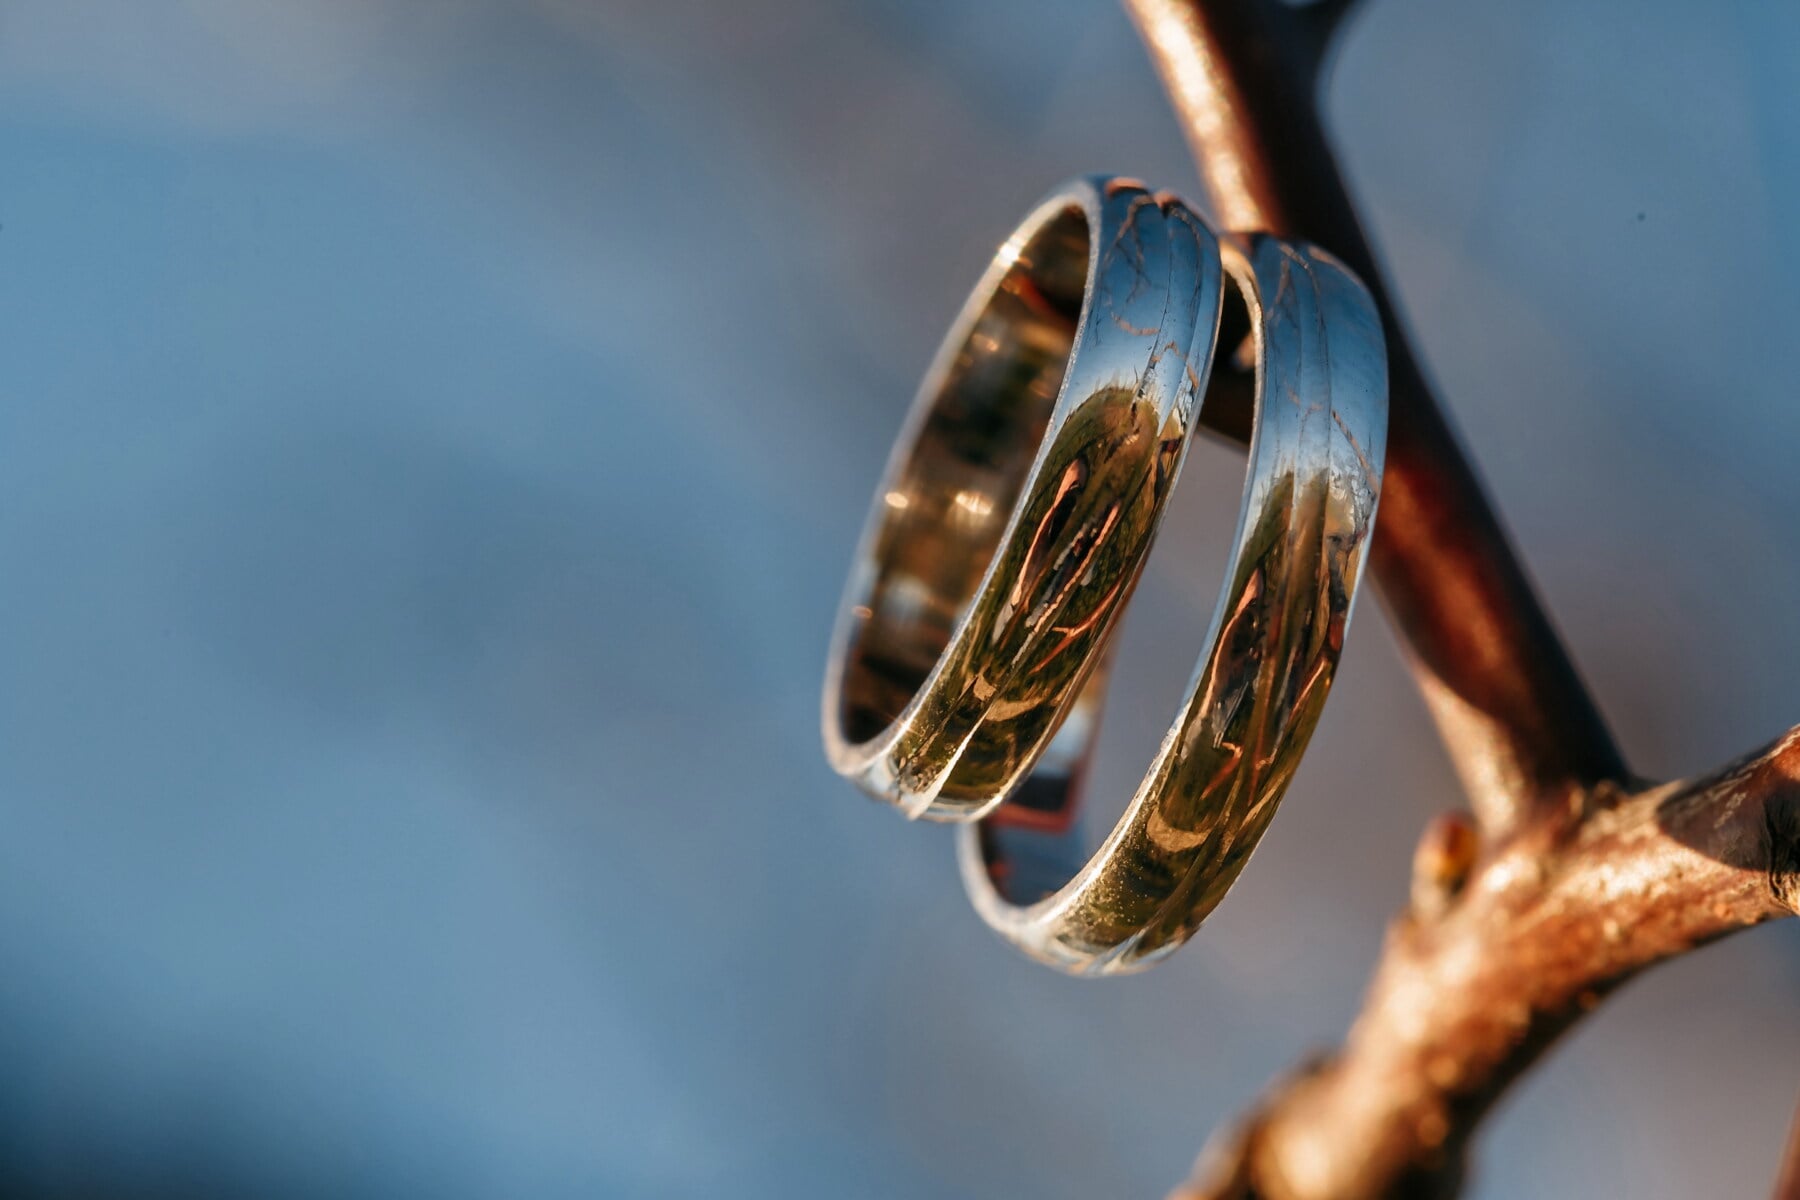 pair, rings, platinum, sunrays, metal, branches, golden shine, reflection, close-up, wedding